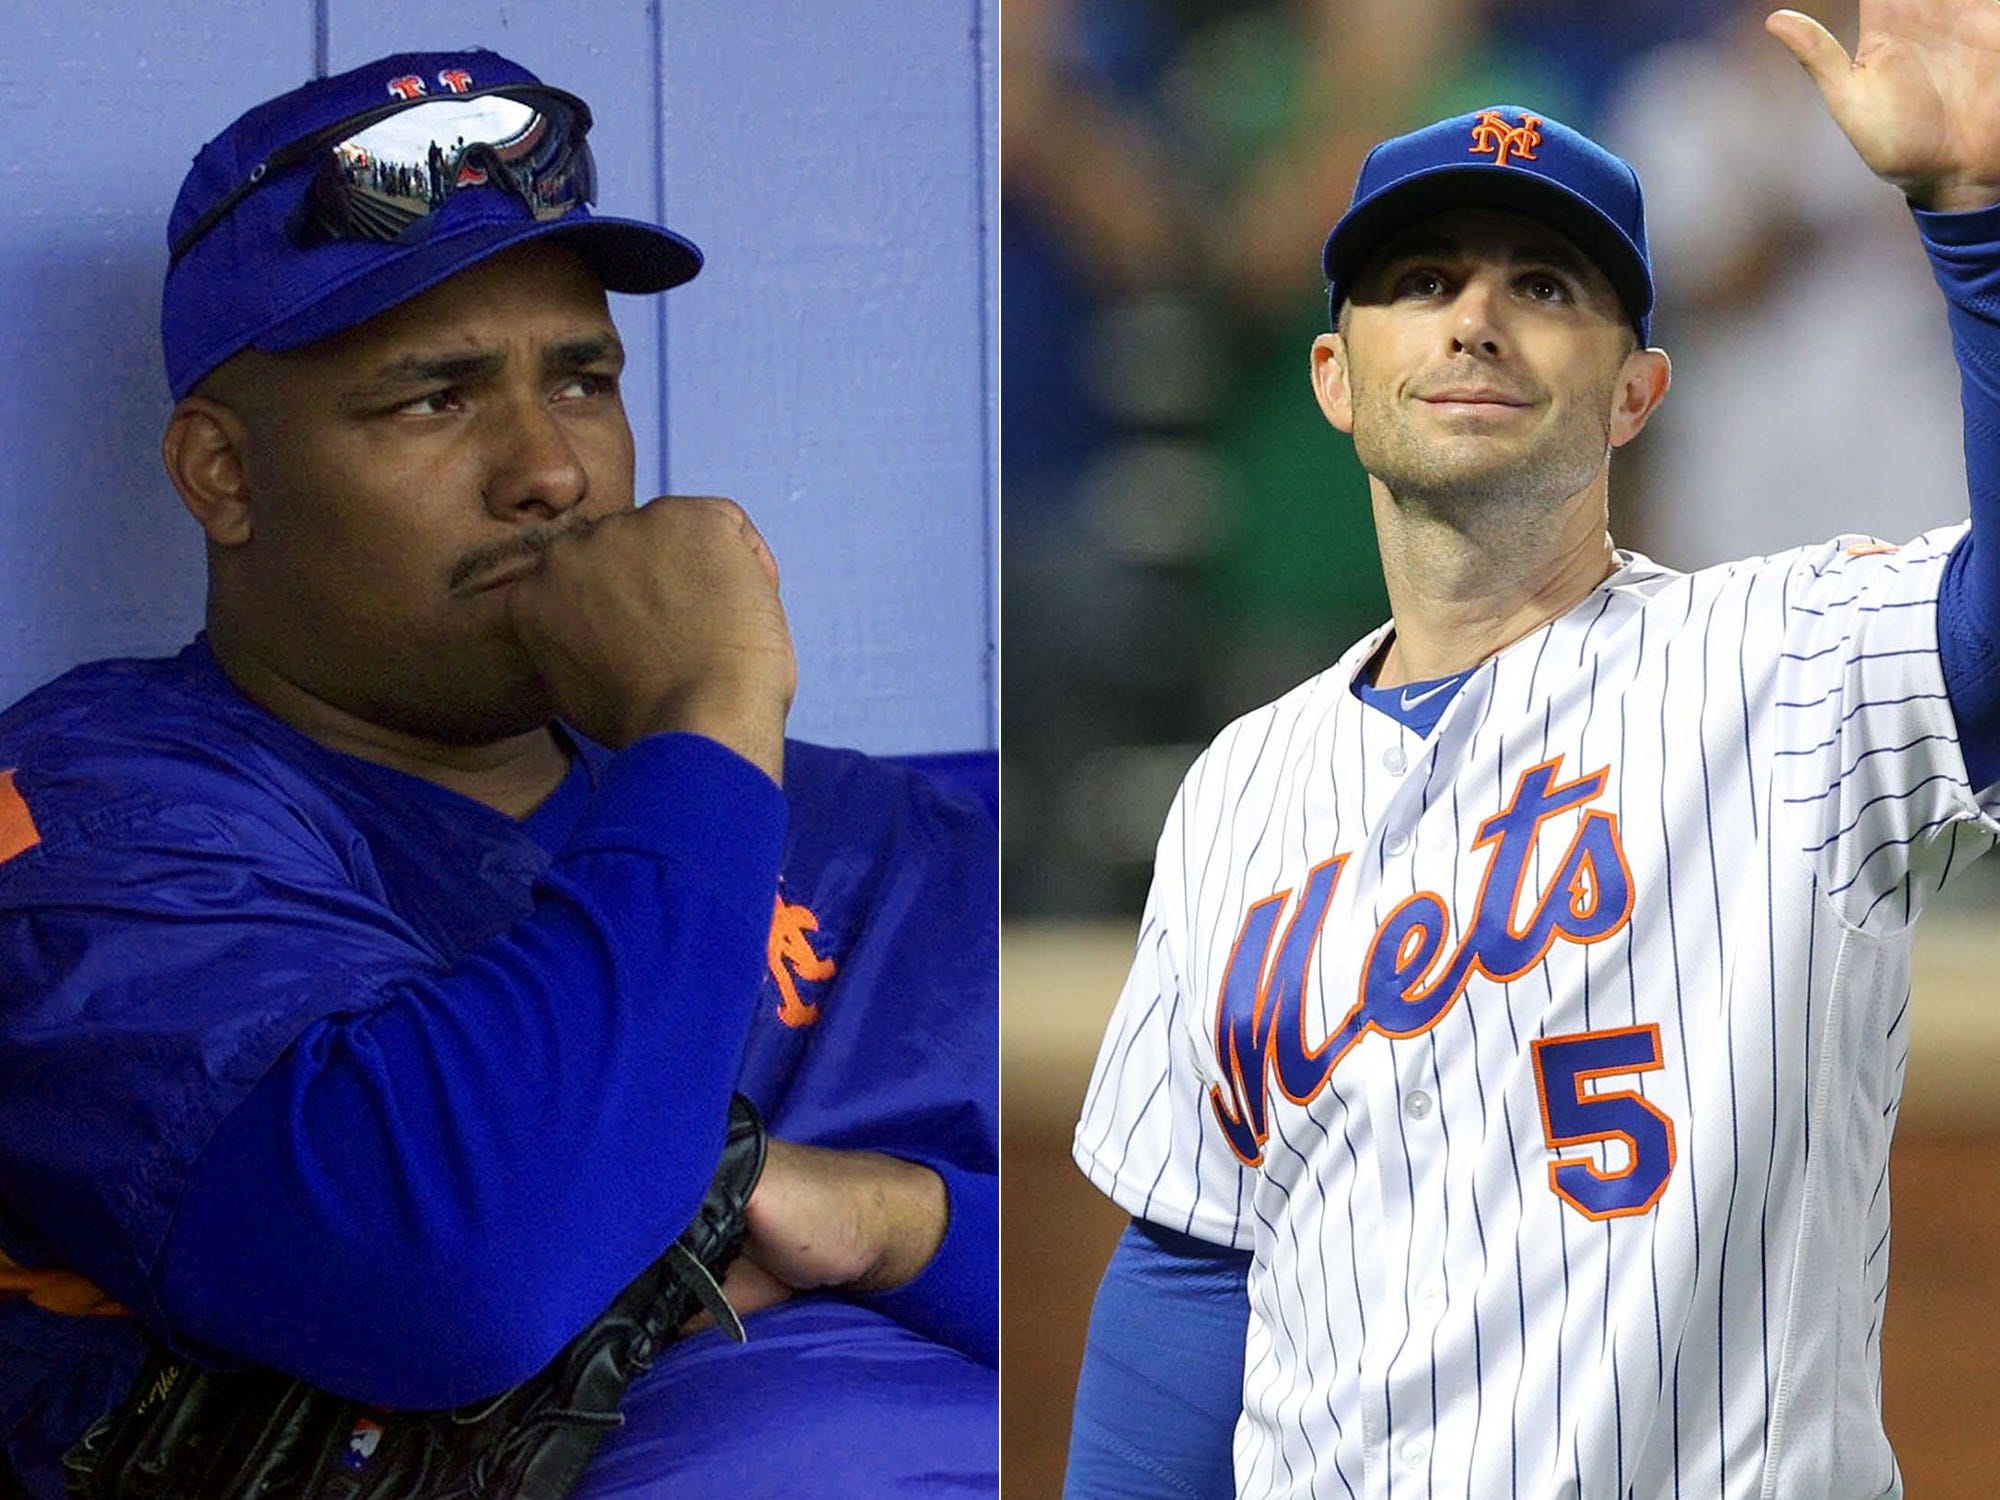 Bobby Bonilla Day: How infamous contract led to the New York Mets landing franchise icon David Wright